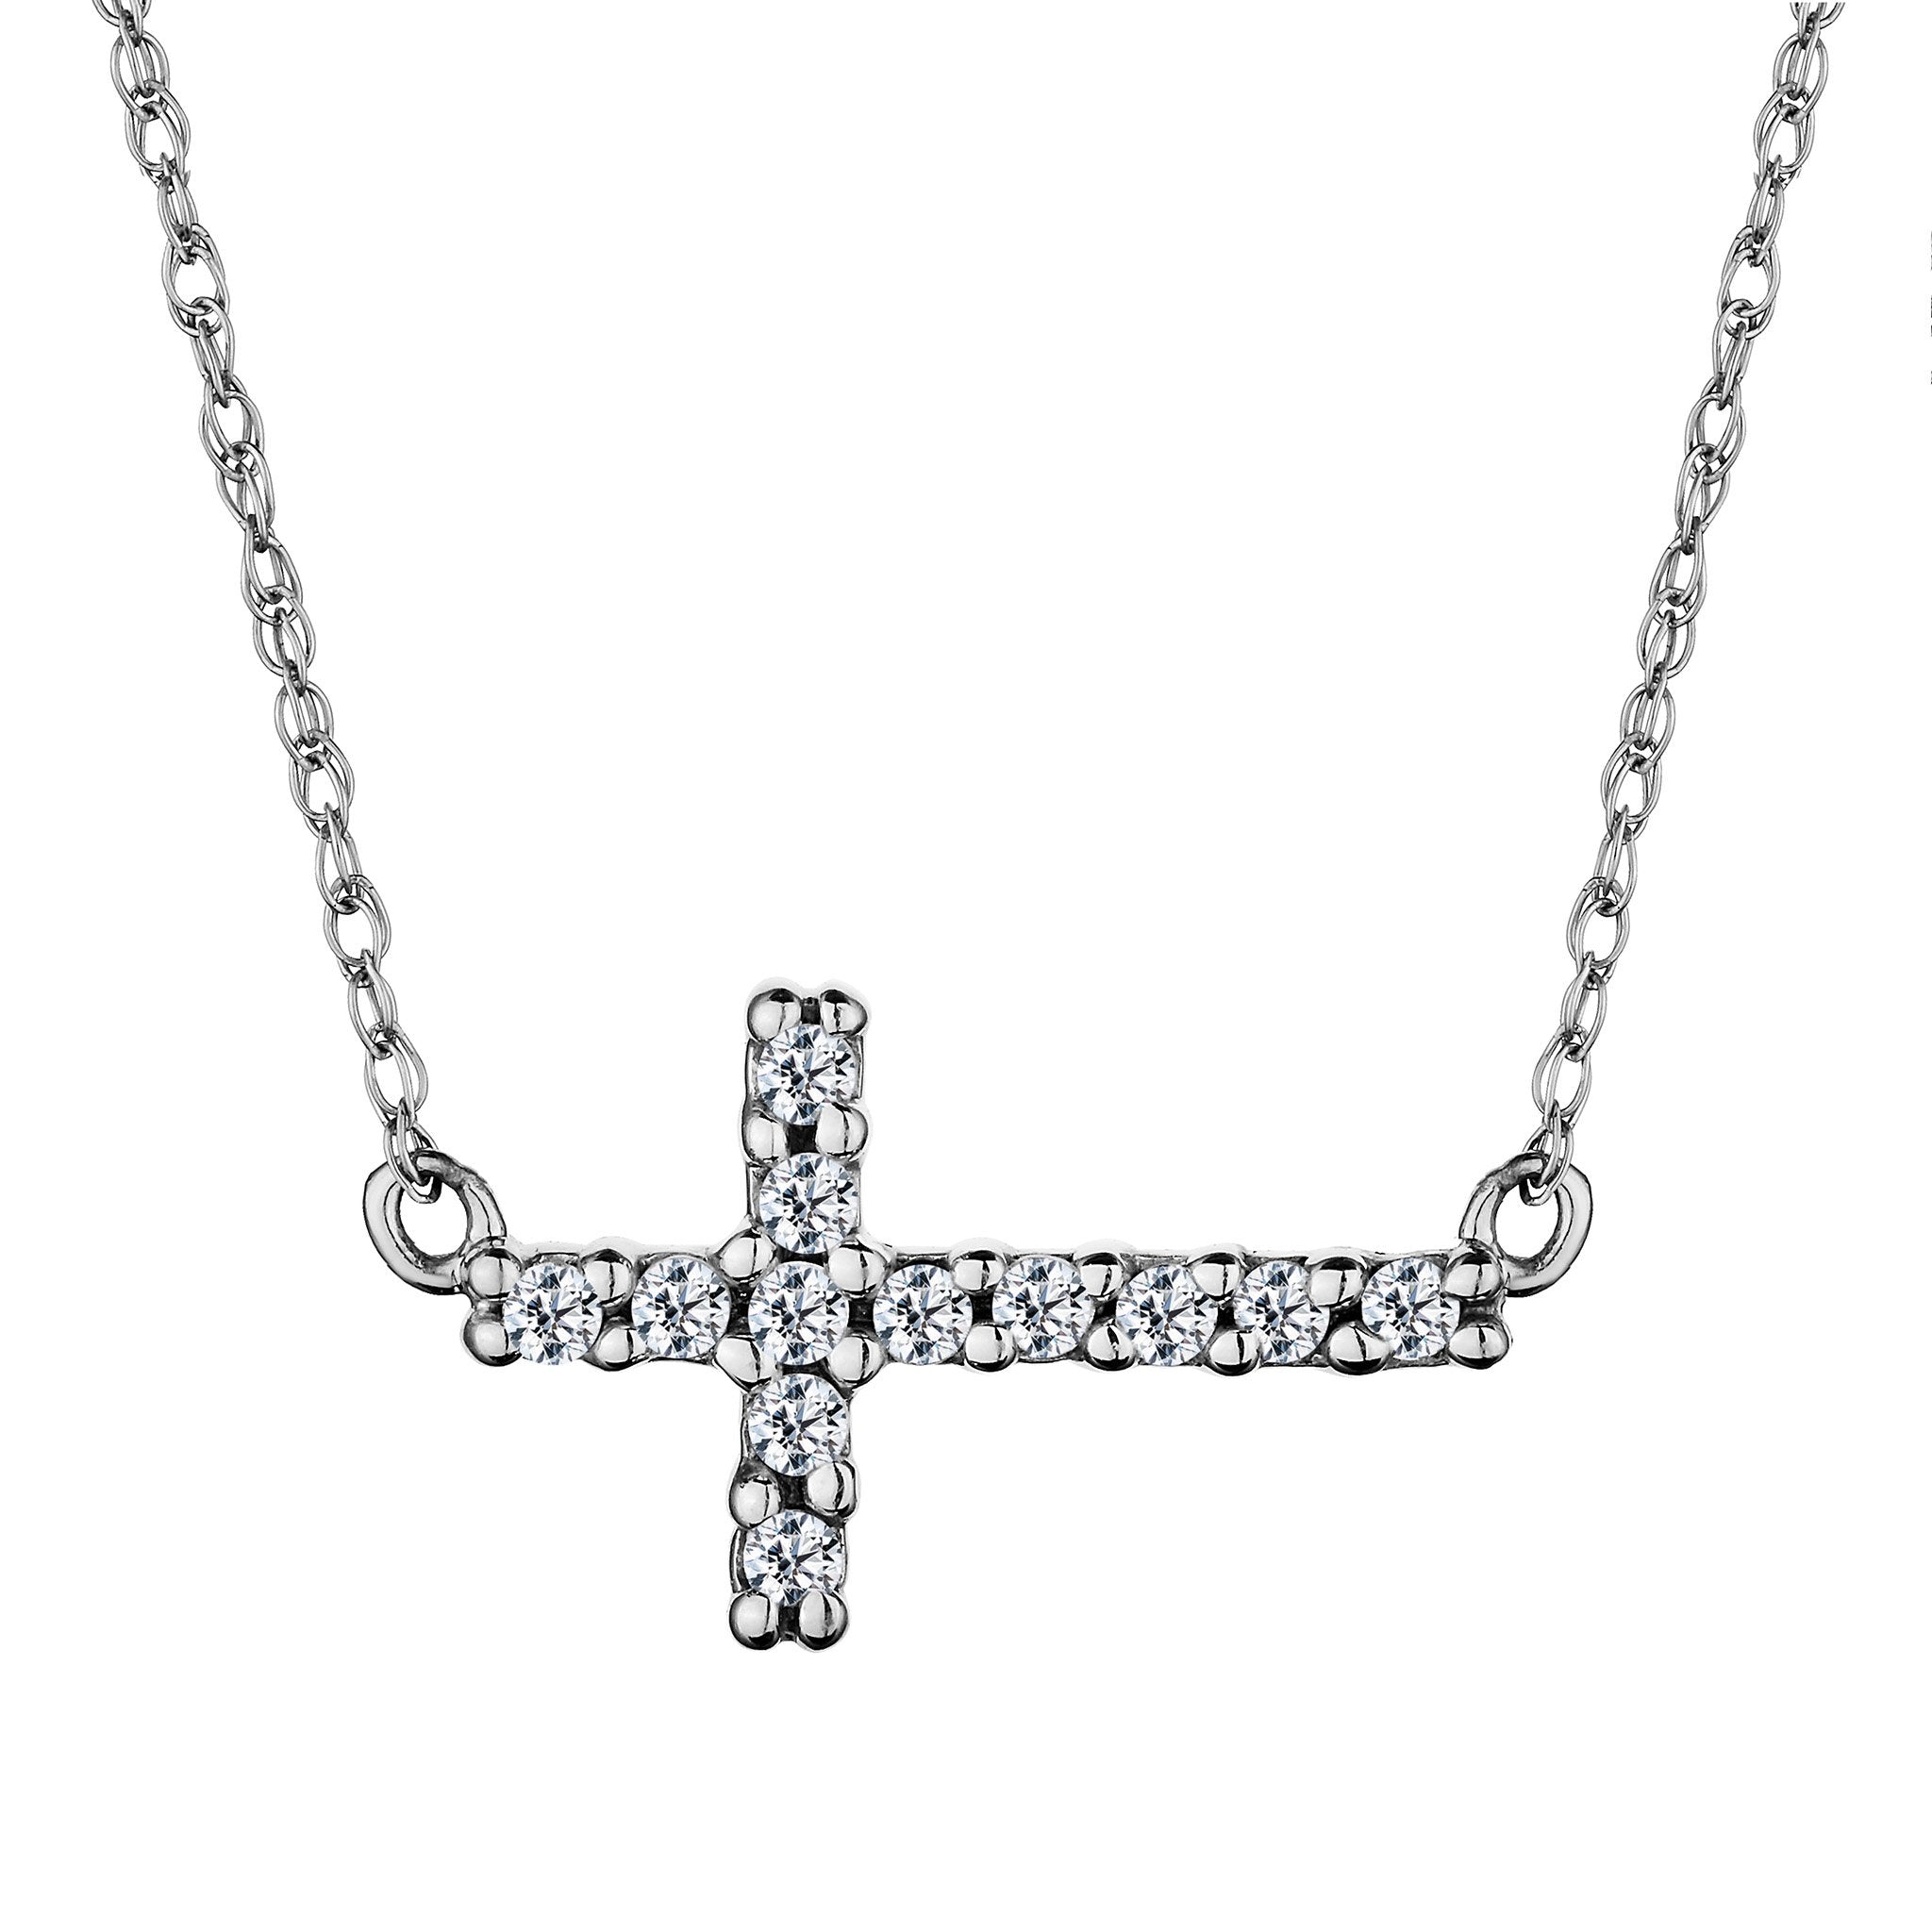 .12 Carat Diamond Sideways Cross And Chain,  14kt White Gold.  Necklaces and Pendants. Griffin Jewellery Designs.